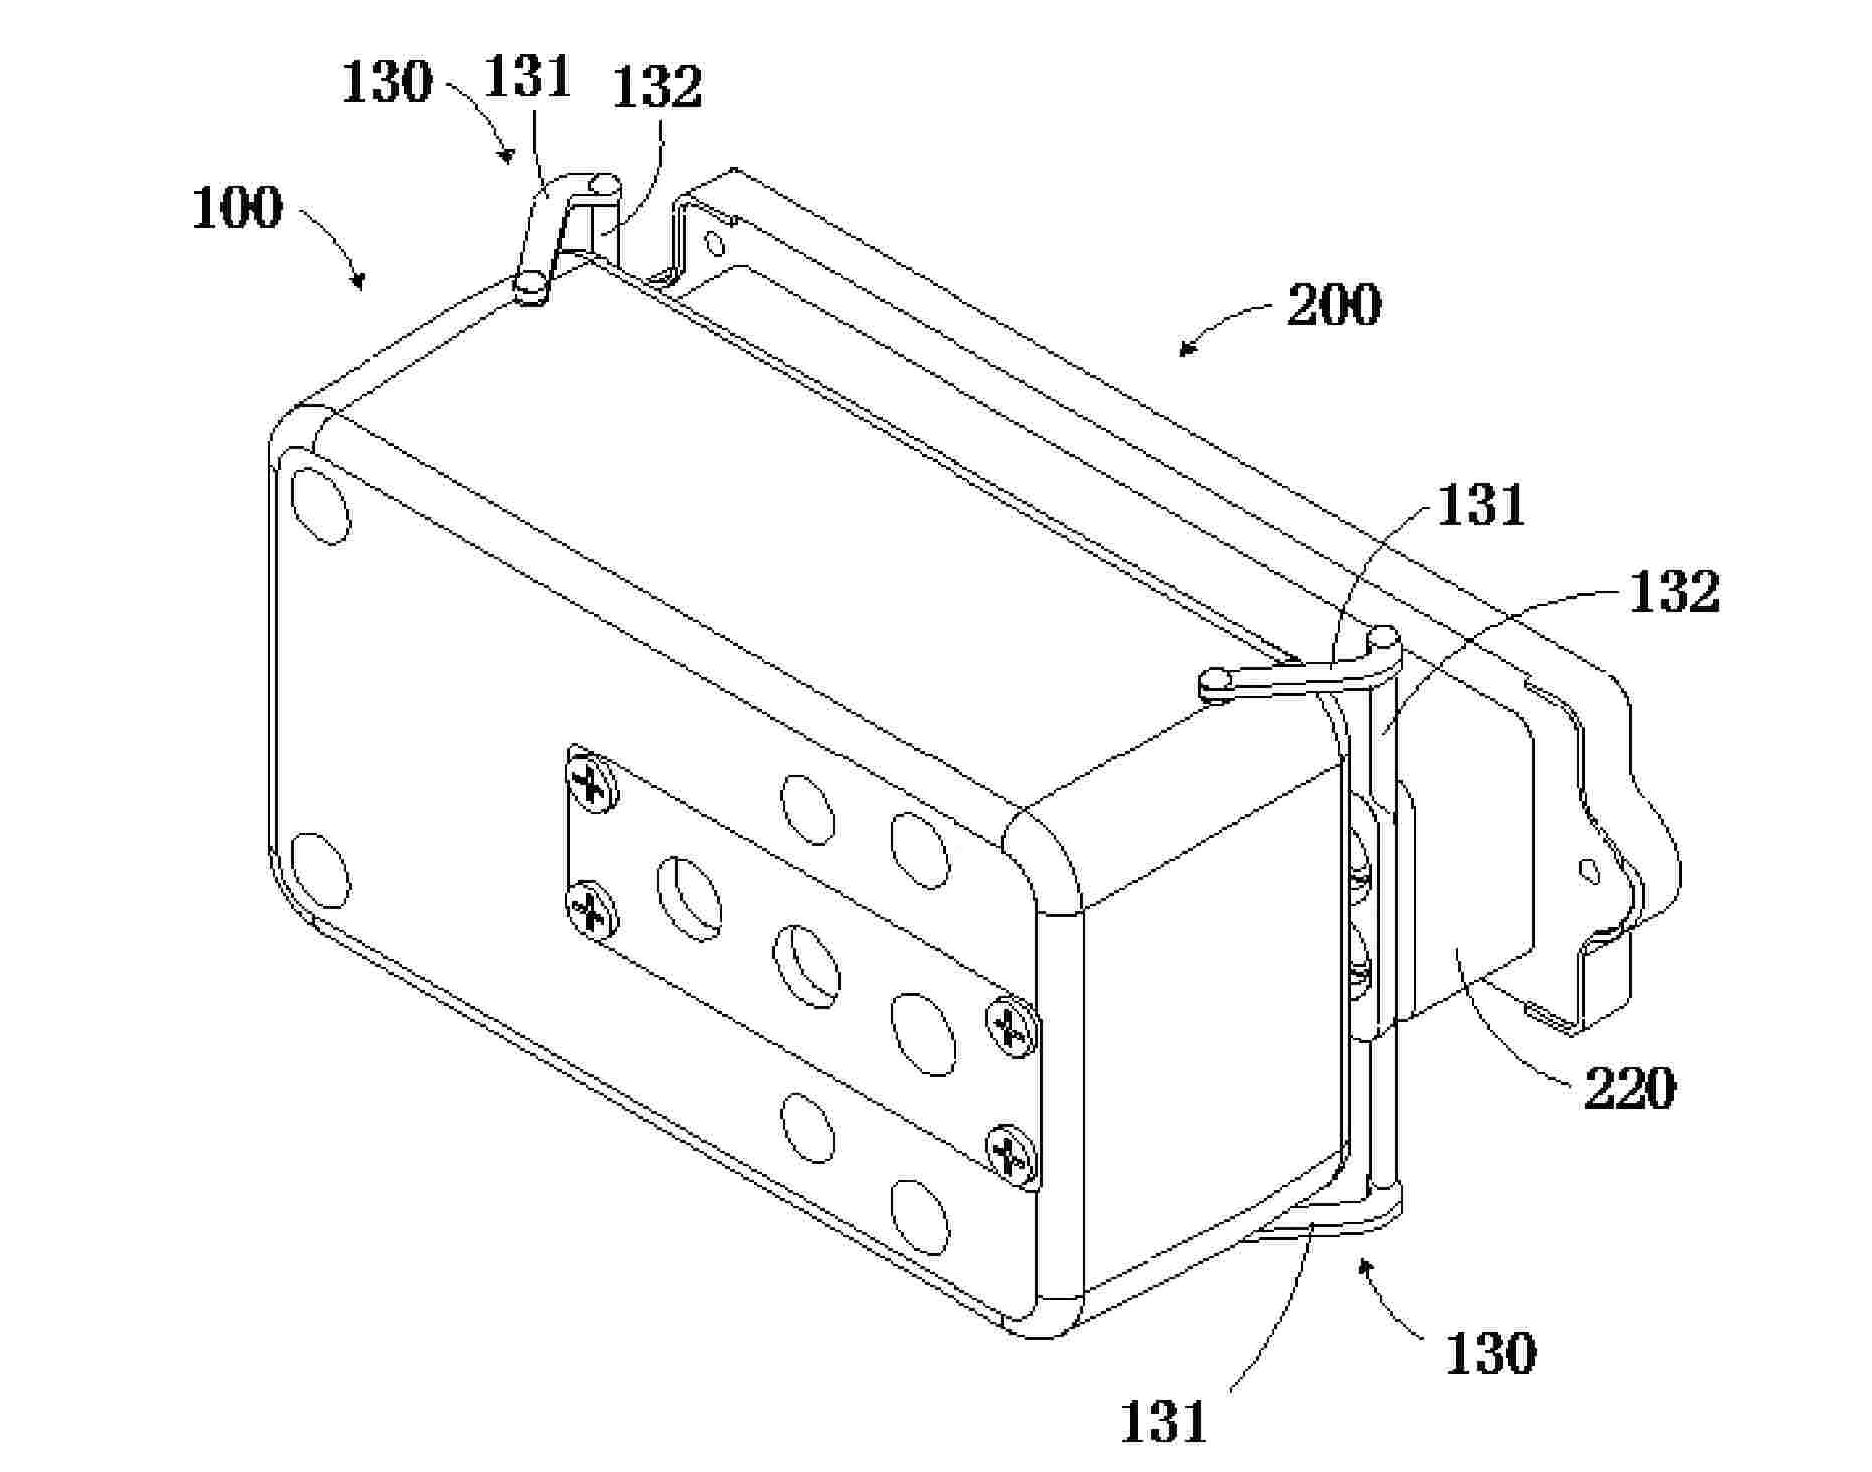 Electric connector and electric coupler assembly